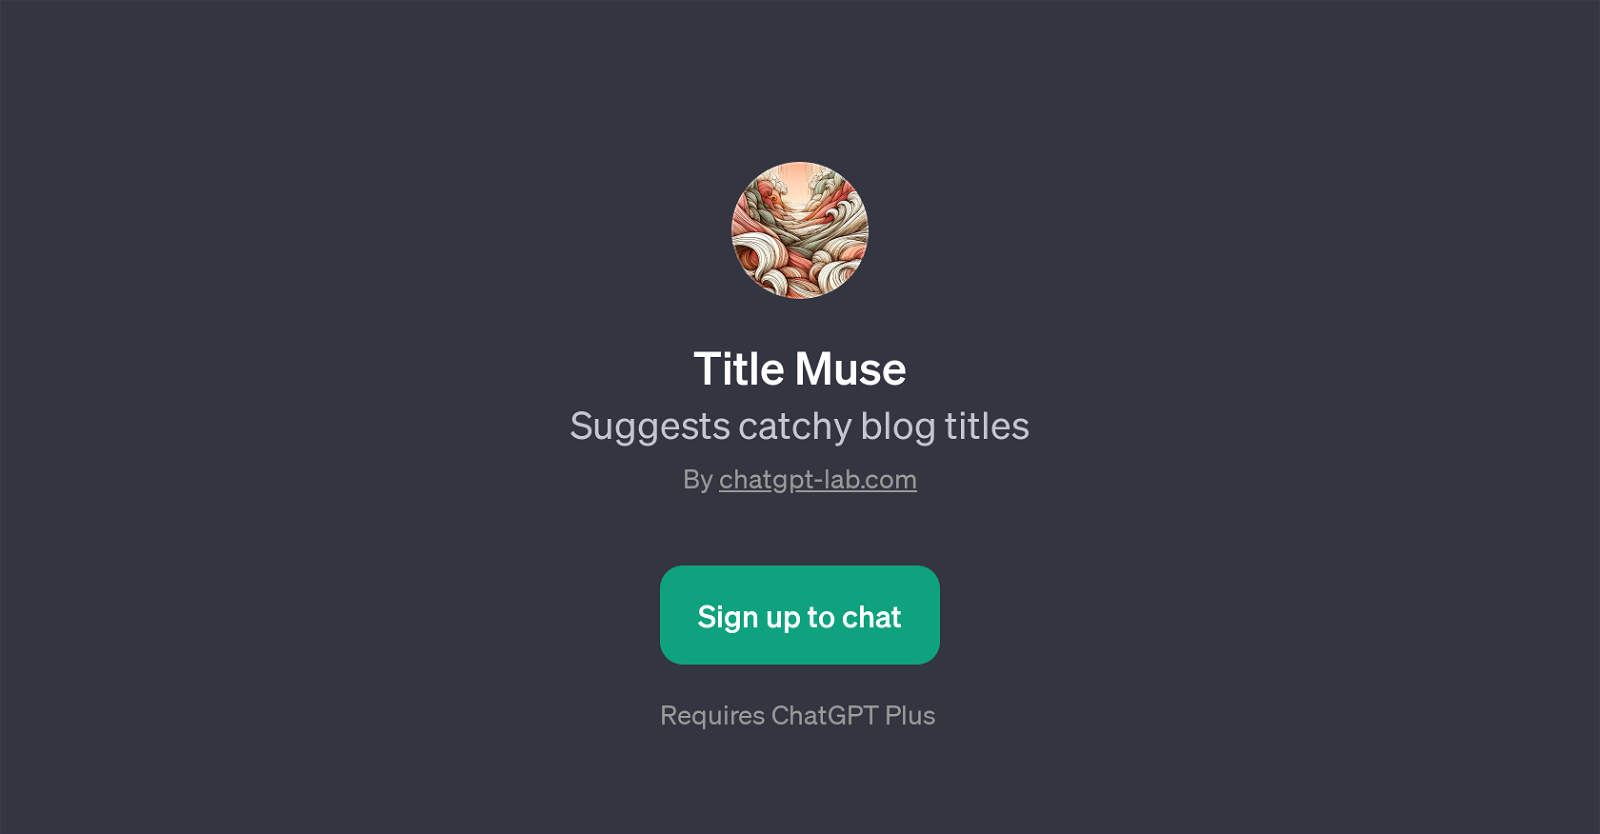 Title Muse website